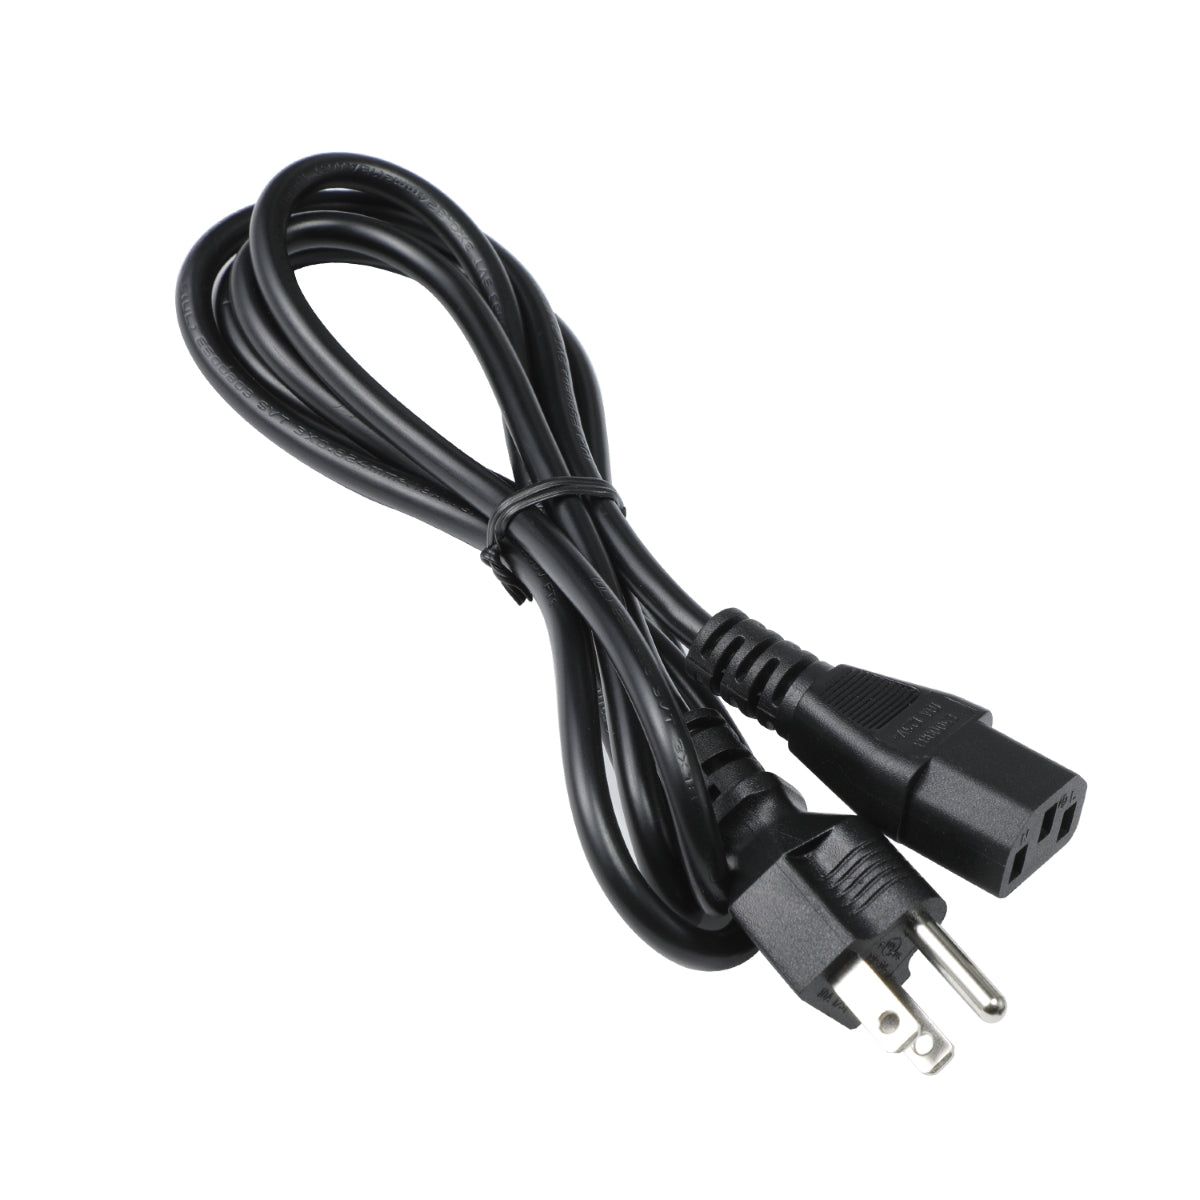 Power Cord for BenQ PD2725U IPS Monitor